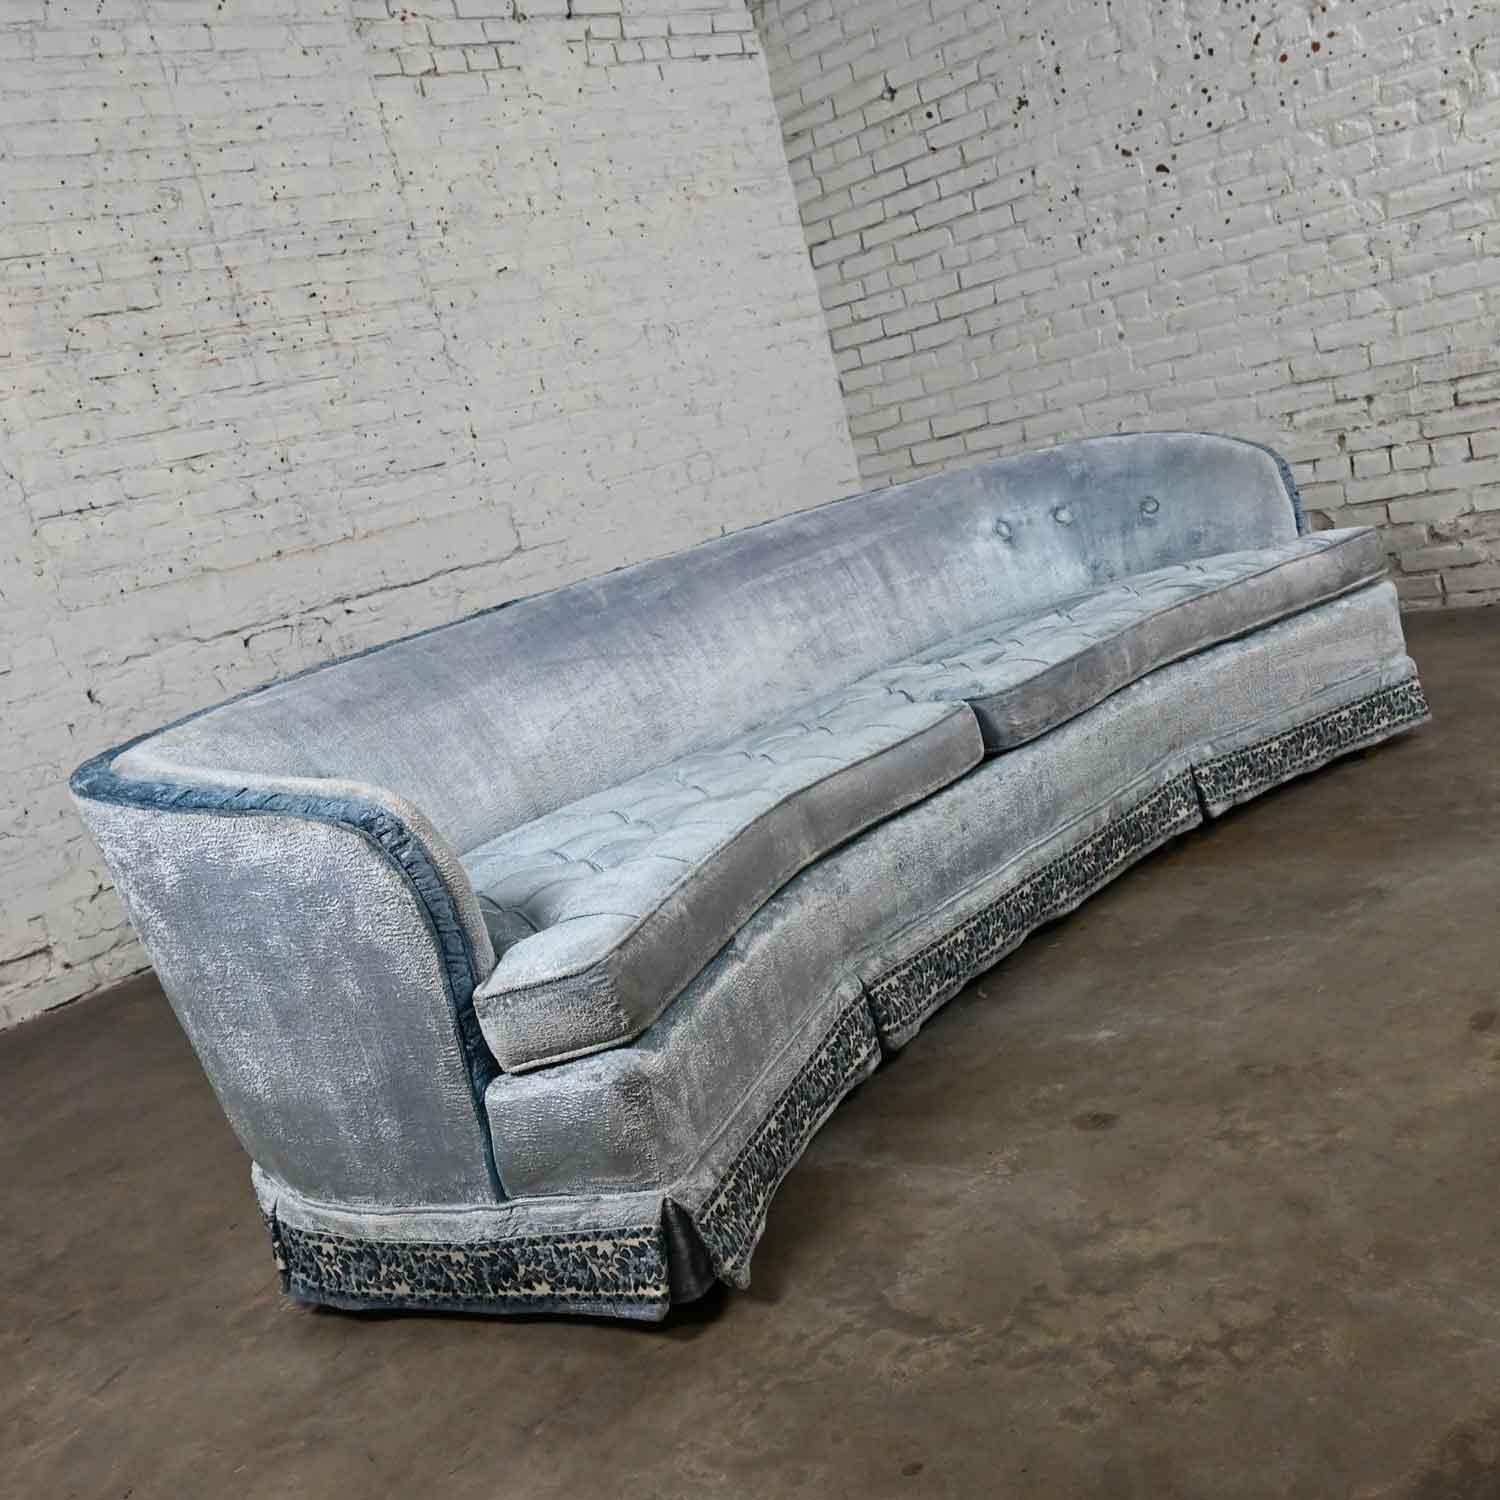 Lovely vintage Traditional or Hollywood Regency or Cottagecore curved kidney shaped blue velvet sofa by American of Martinsville. Comprised of 2 loose button tucked poly foam cushions, tight back with rouching, needlepoint ribbon trim skirt, and